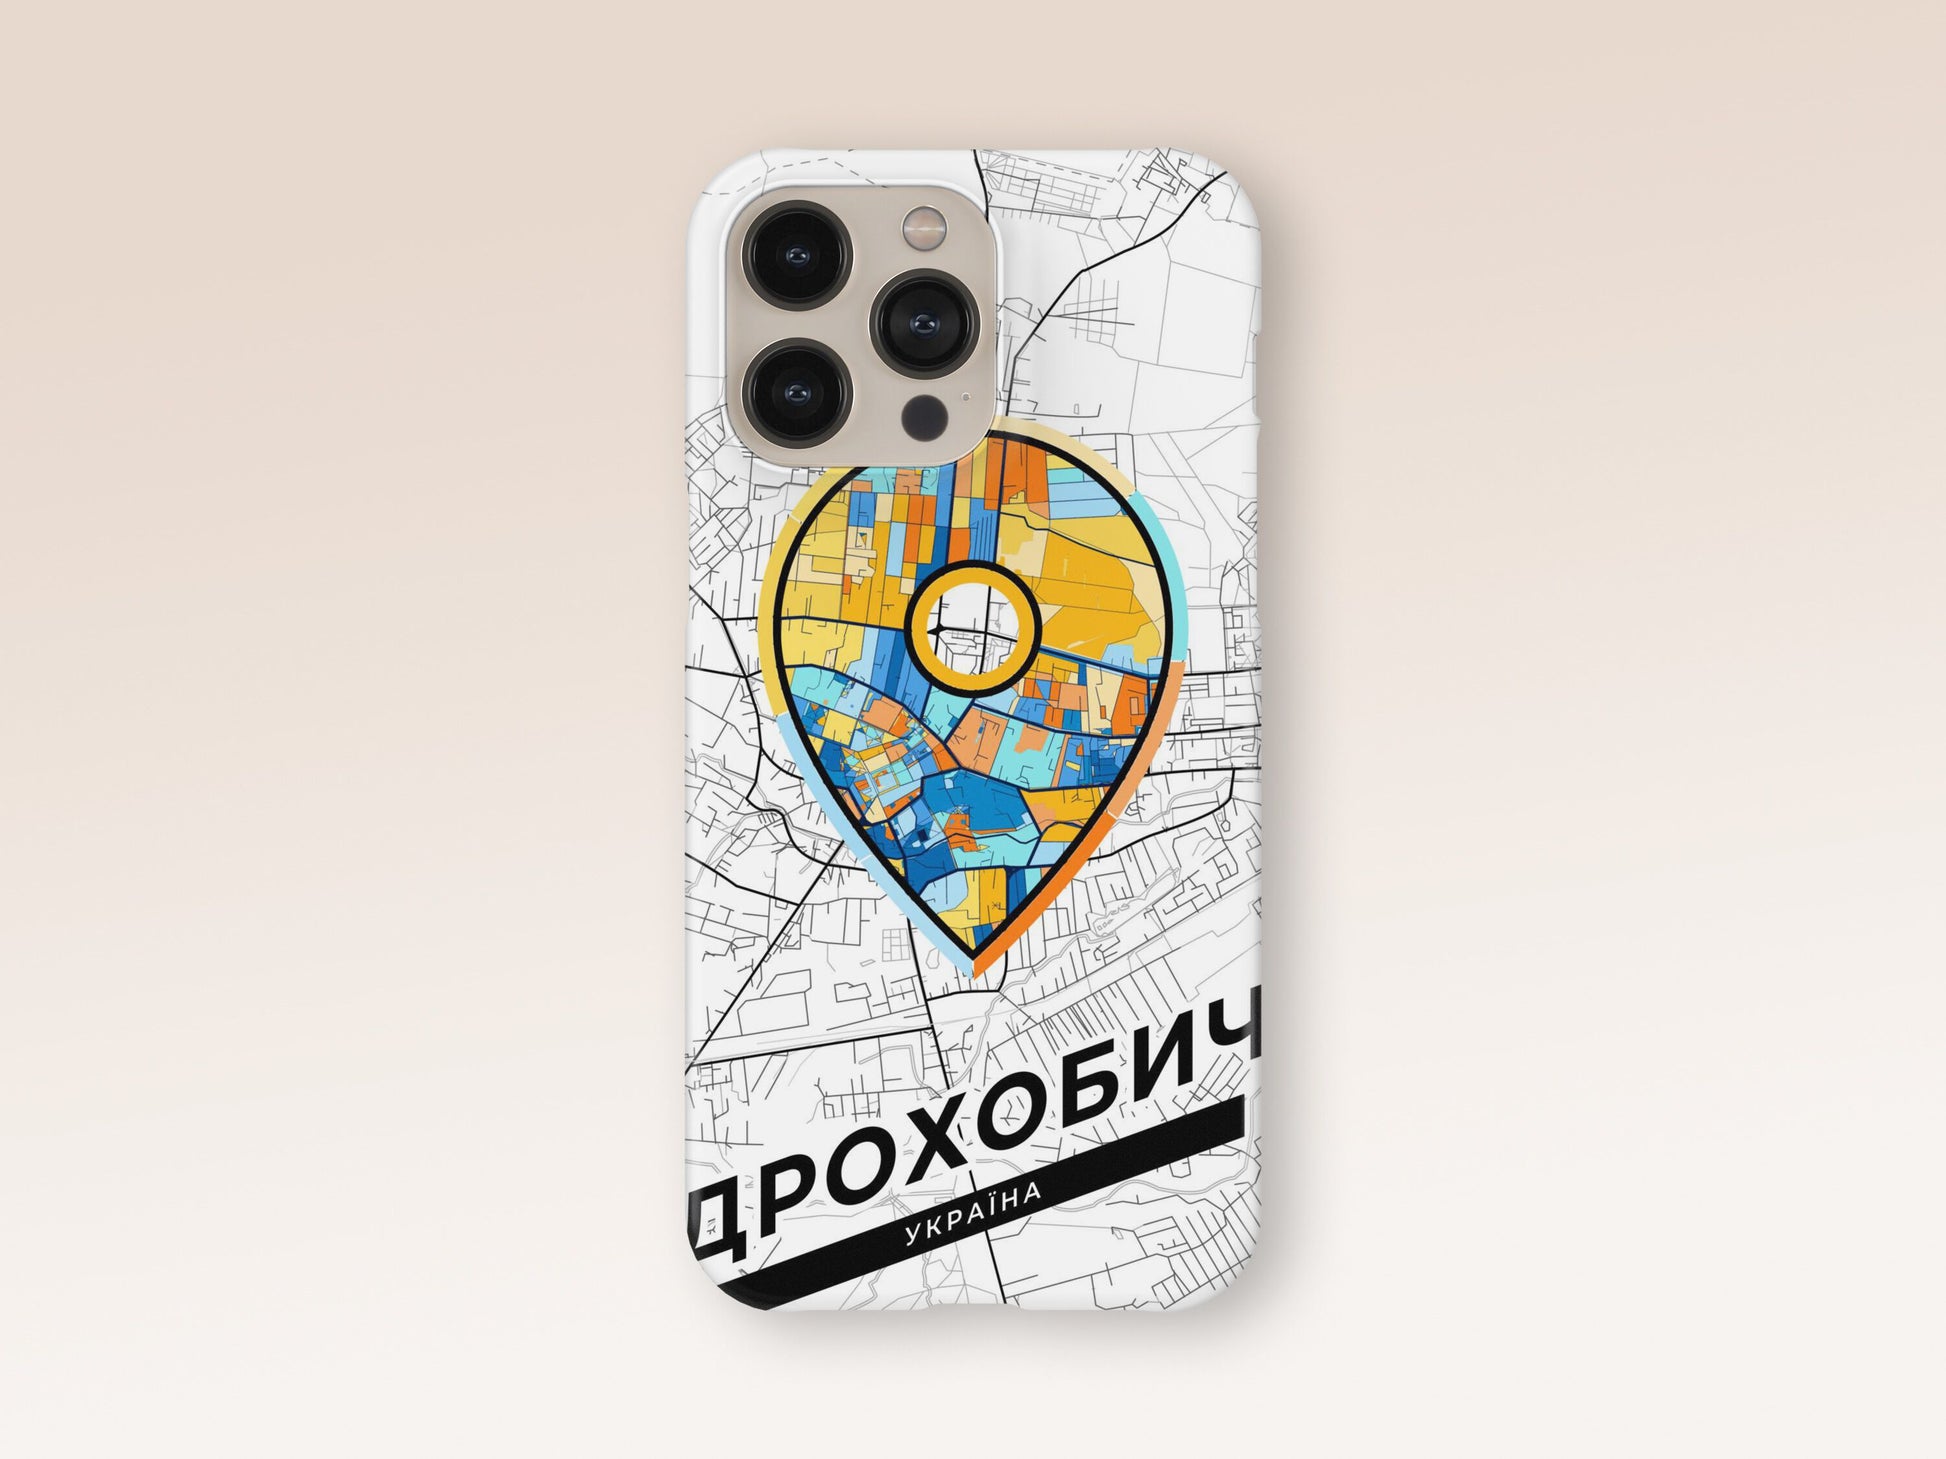 Drohobych Ukraine slim phone case with colorful icon. Birthday, wedding or housewarming gift. Couple match cases. 1